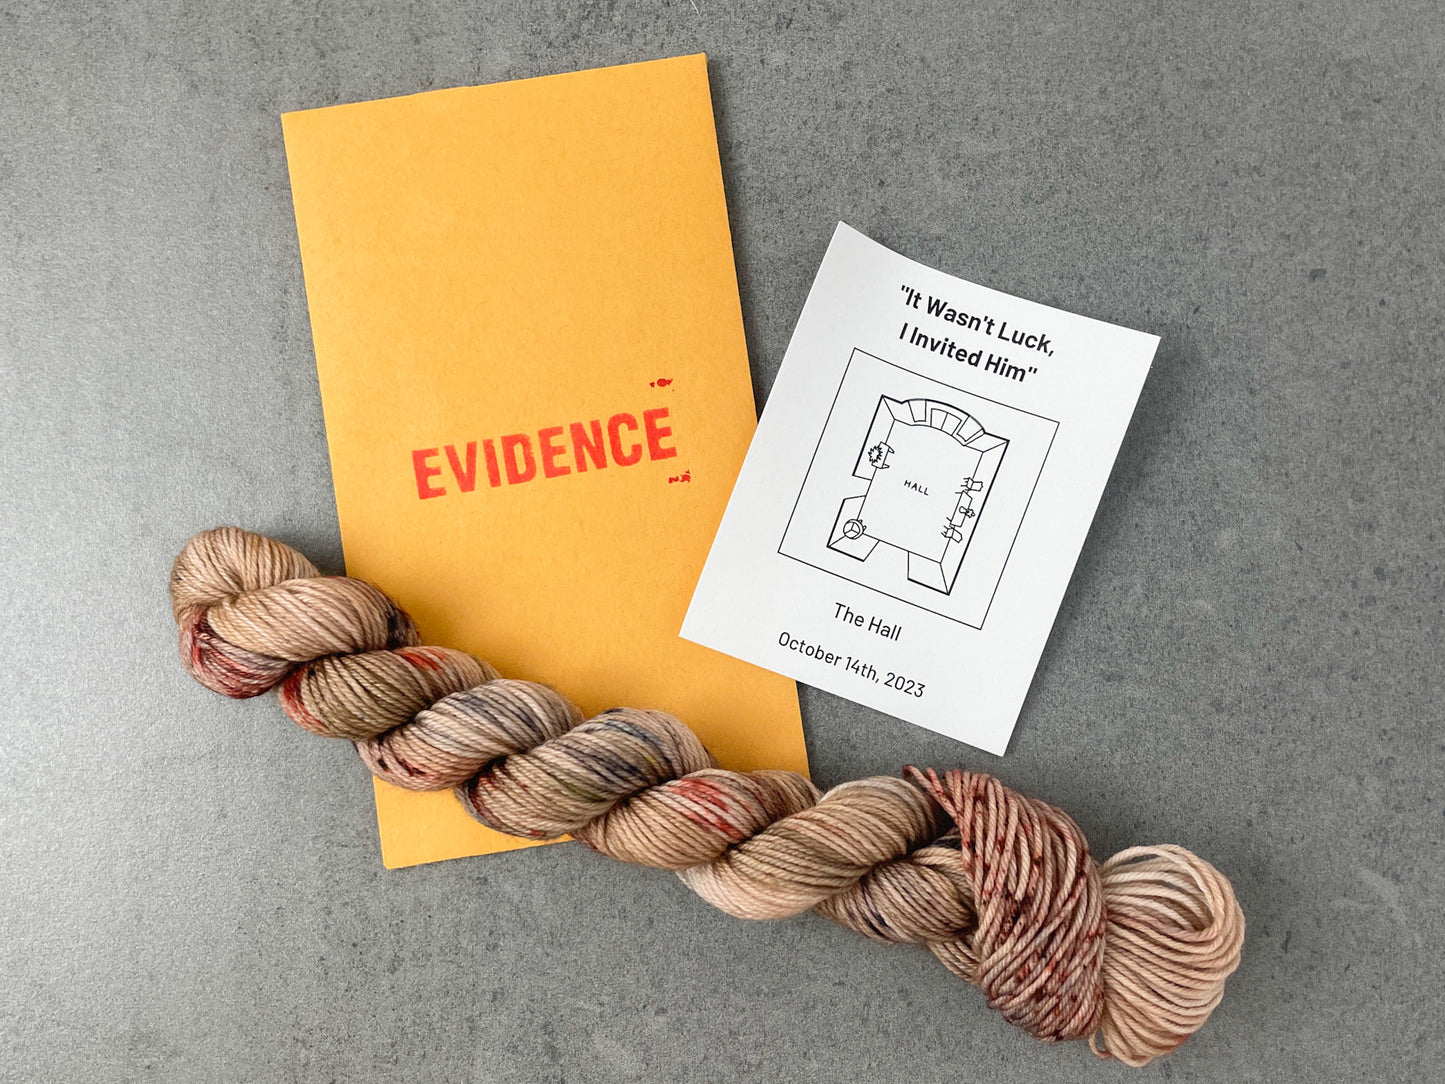 A skein of tan yarn with brown, black, and blood-red speckles on top of an envelope stamped with "Evidence" and a card with an overhead drawing of the hall on it.